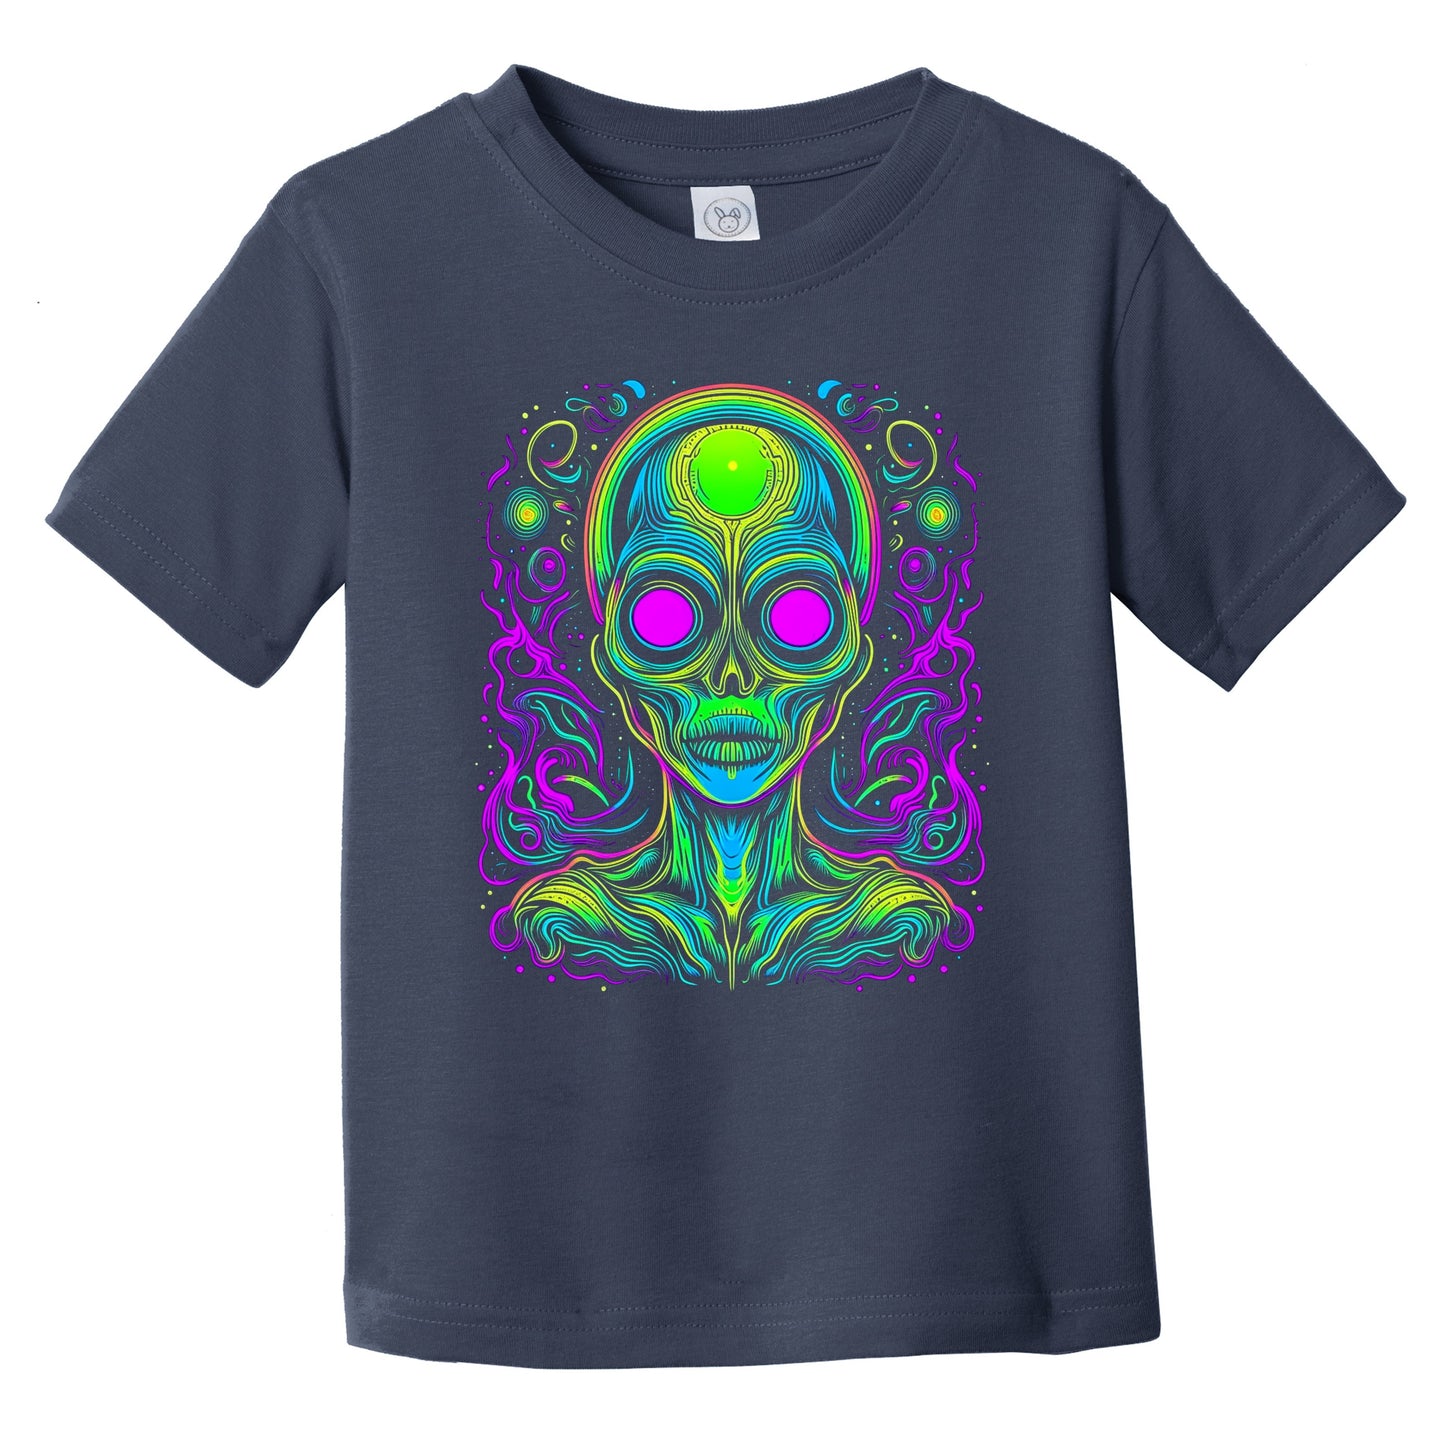 Colorful Bright Space Alien Vibrant Psychedelic Martian Art Infant Toddler T-Shirt